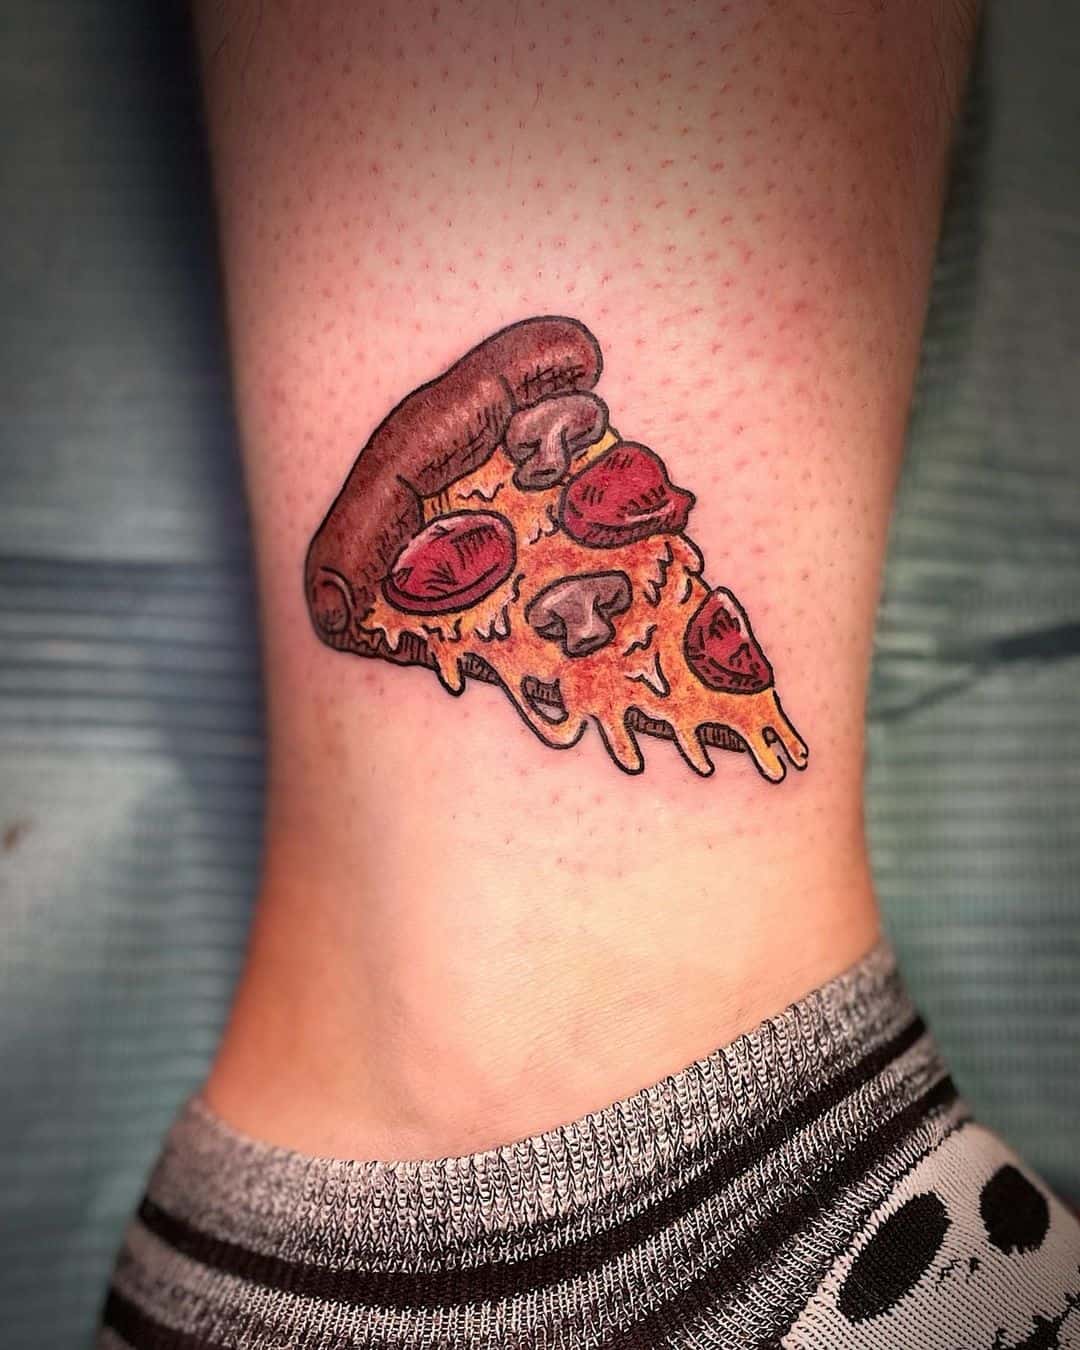 Ink You Love: Pizza Slice Tattoo Absolutely Rules